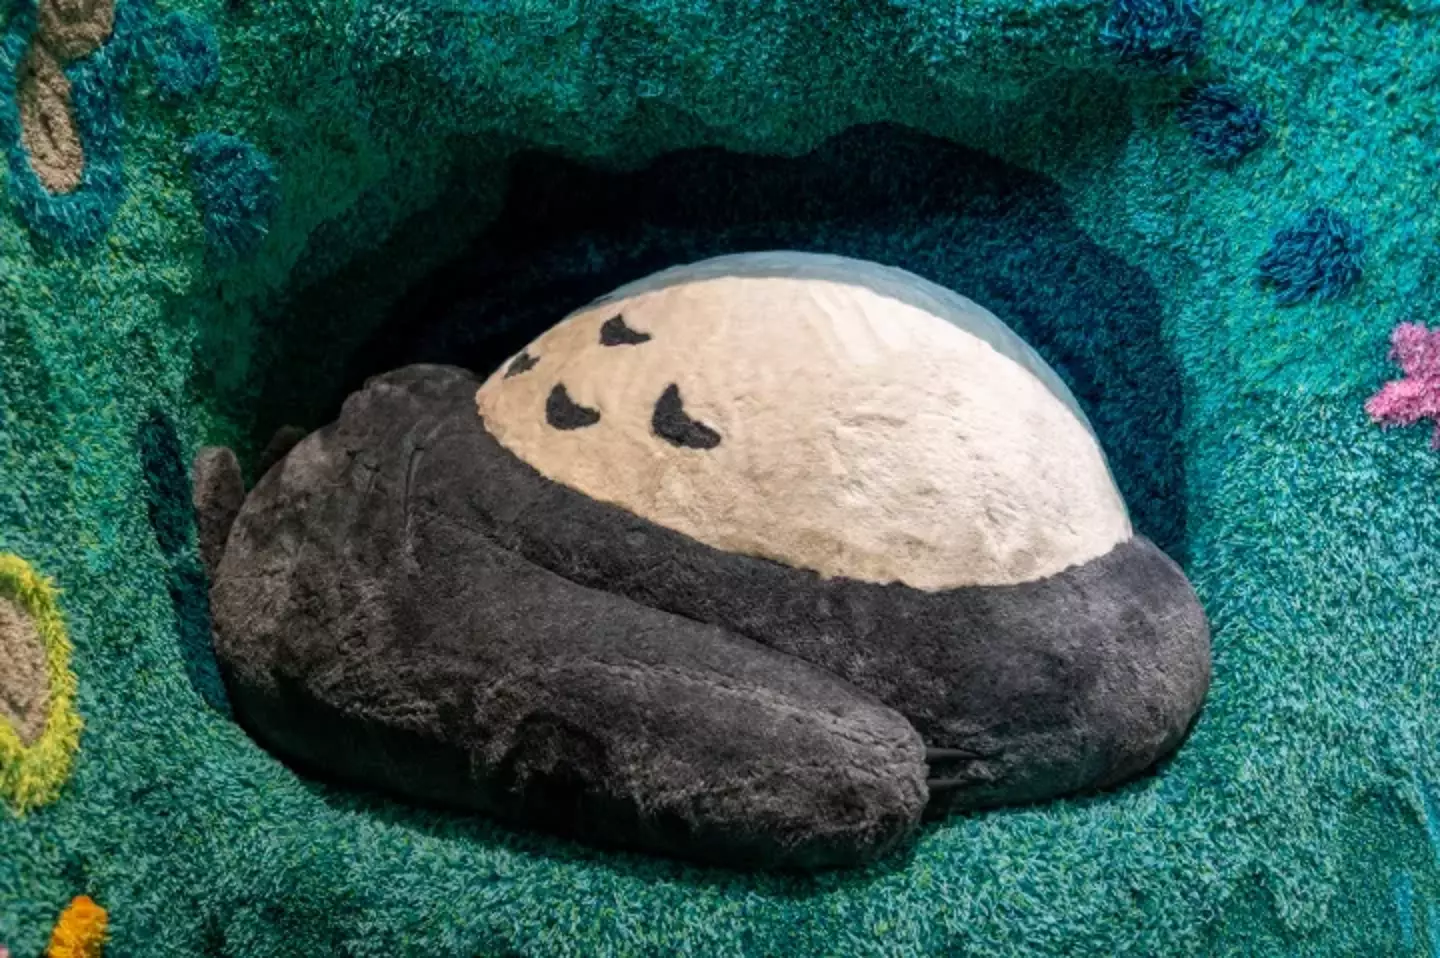 A play area in the theme park features a sleeping Totoro.